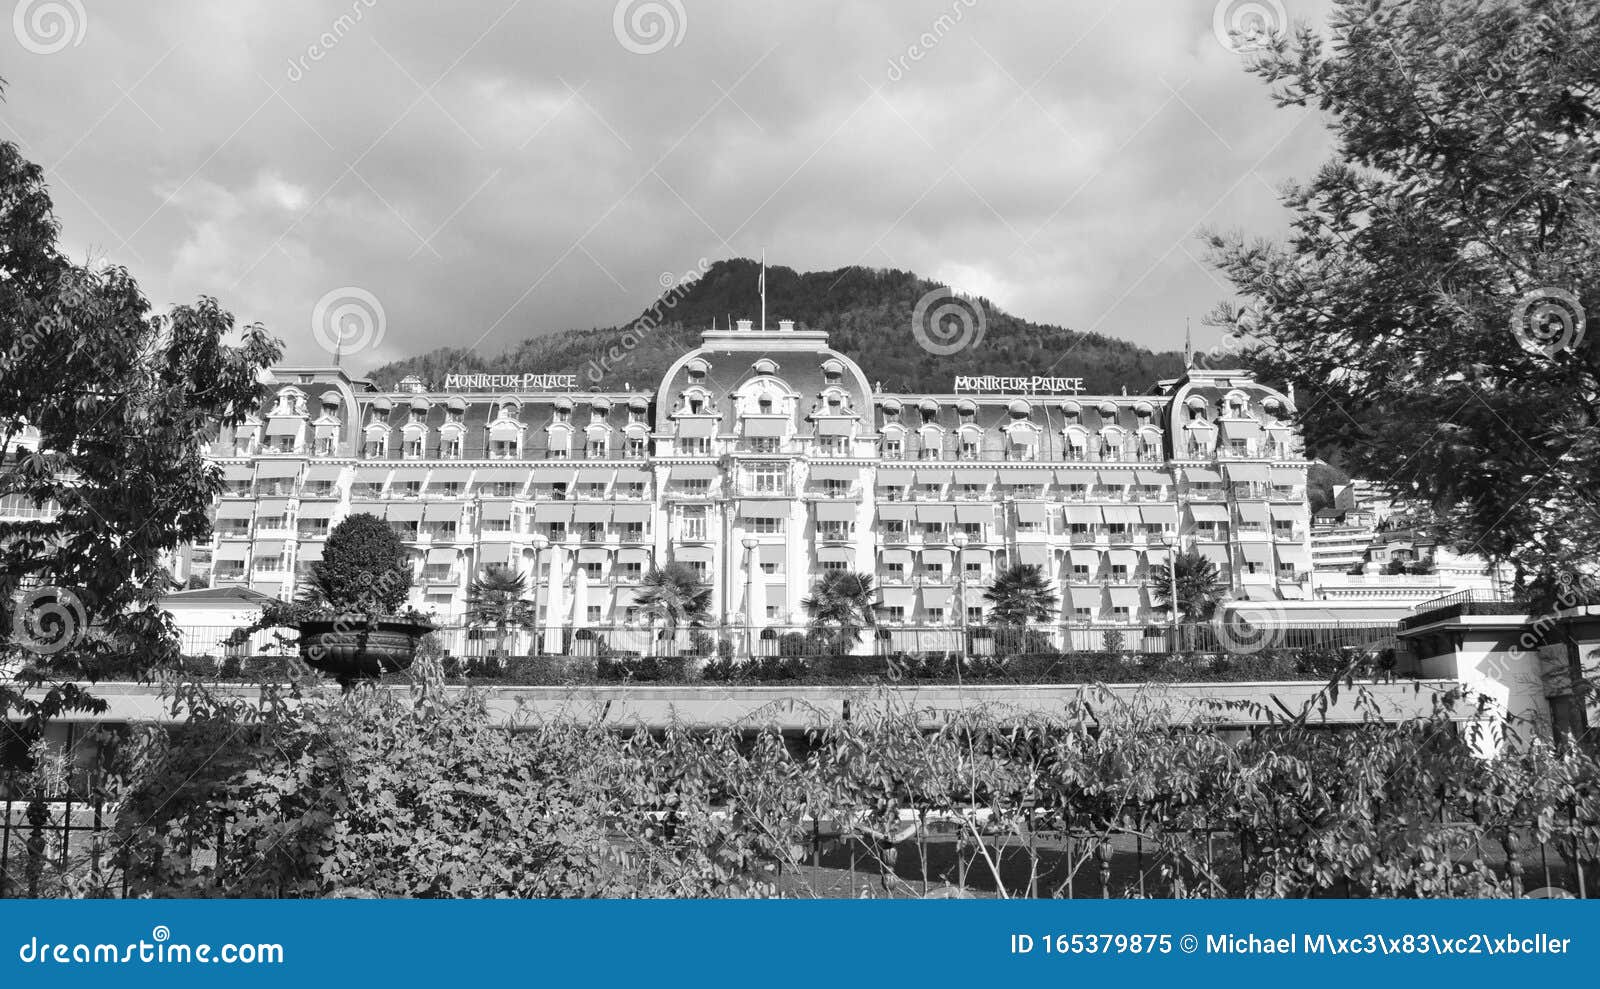 the montreux palace belle epoque hotel at the swiss riviera in montreux city